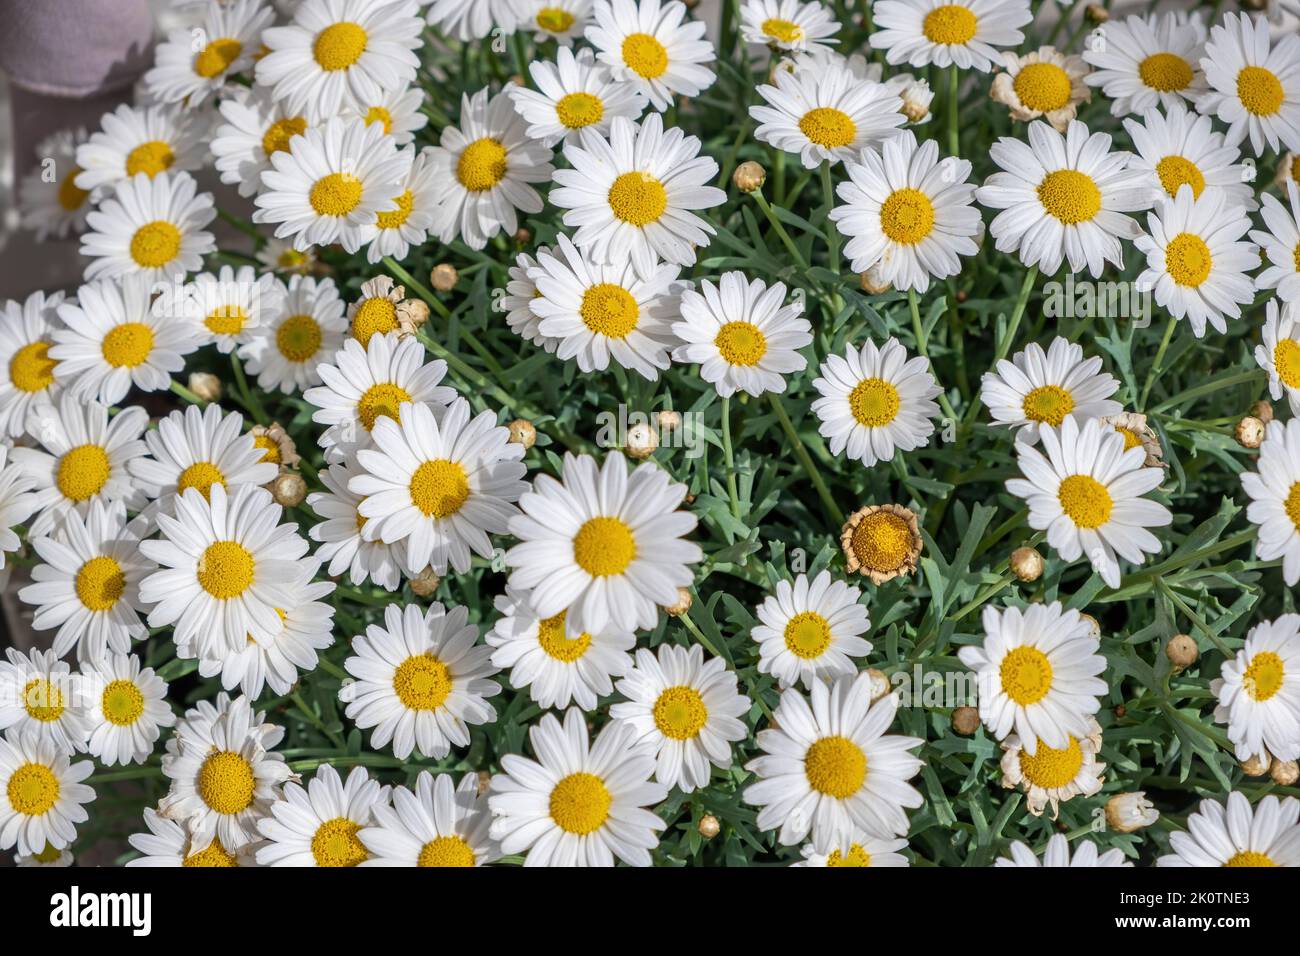 Daisy, bellis perennis, white flower with yellow center at Netherlands, Holland field. Common daisy is a perennial herbaceous plant. Full background t Stock Photo